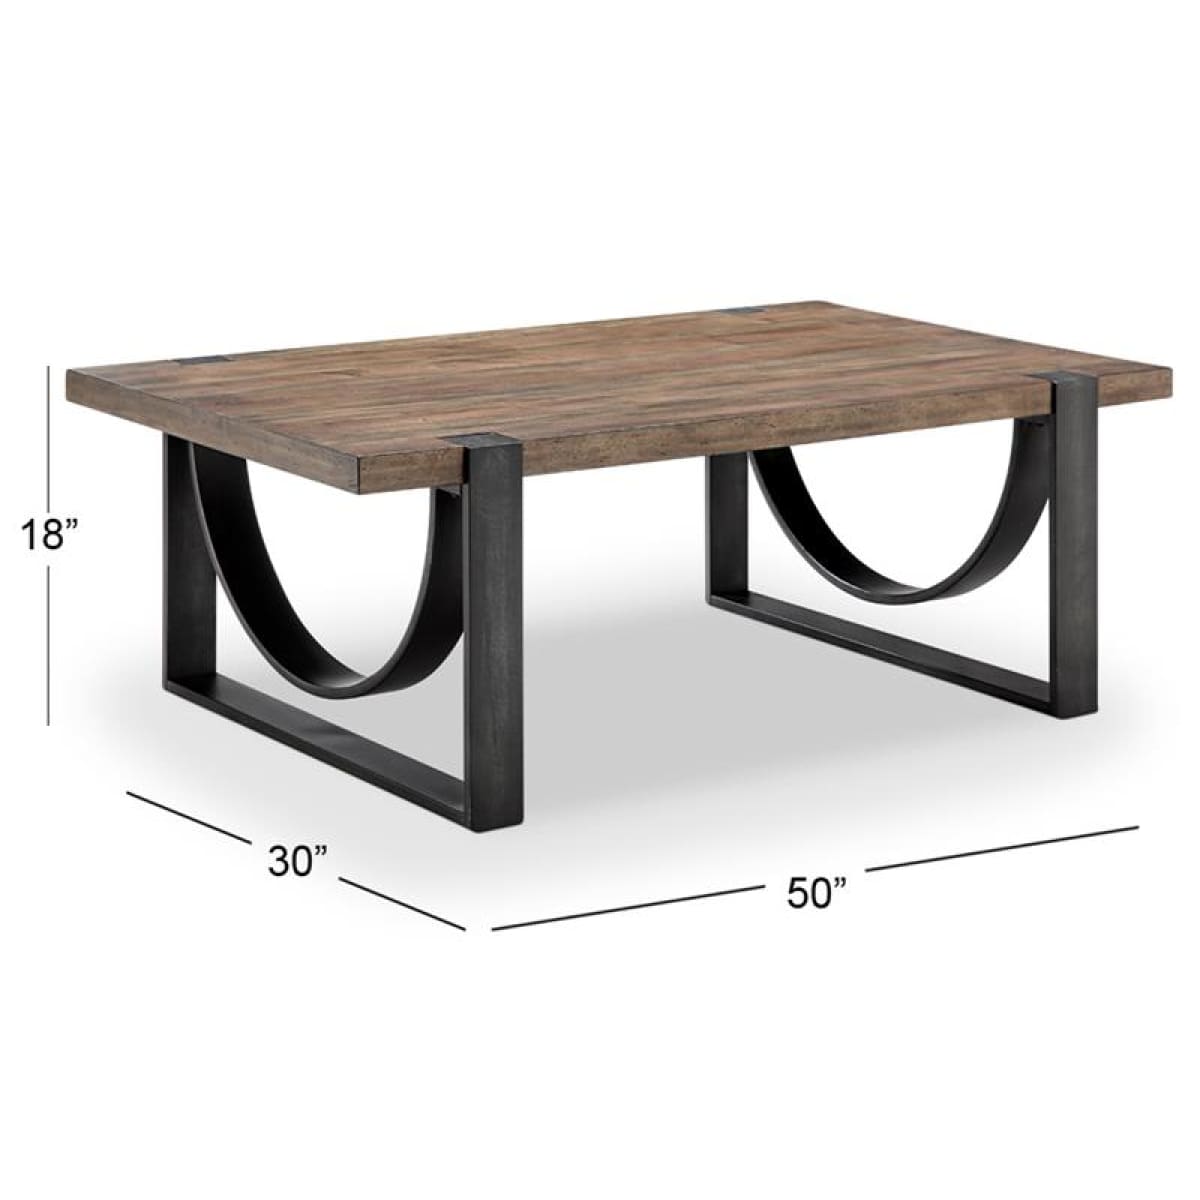 Bowden Coffee Table - COFFEE TABLE